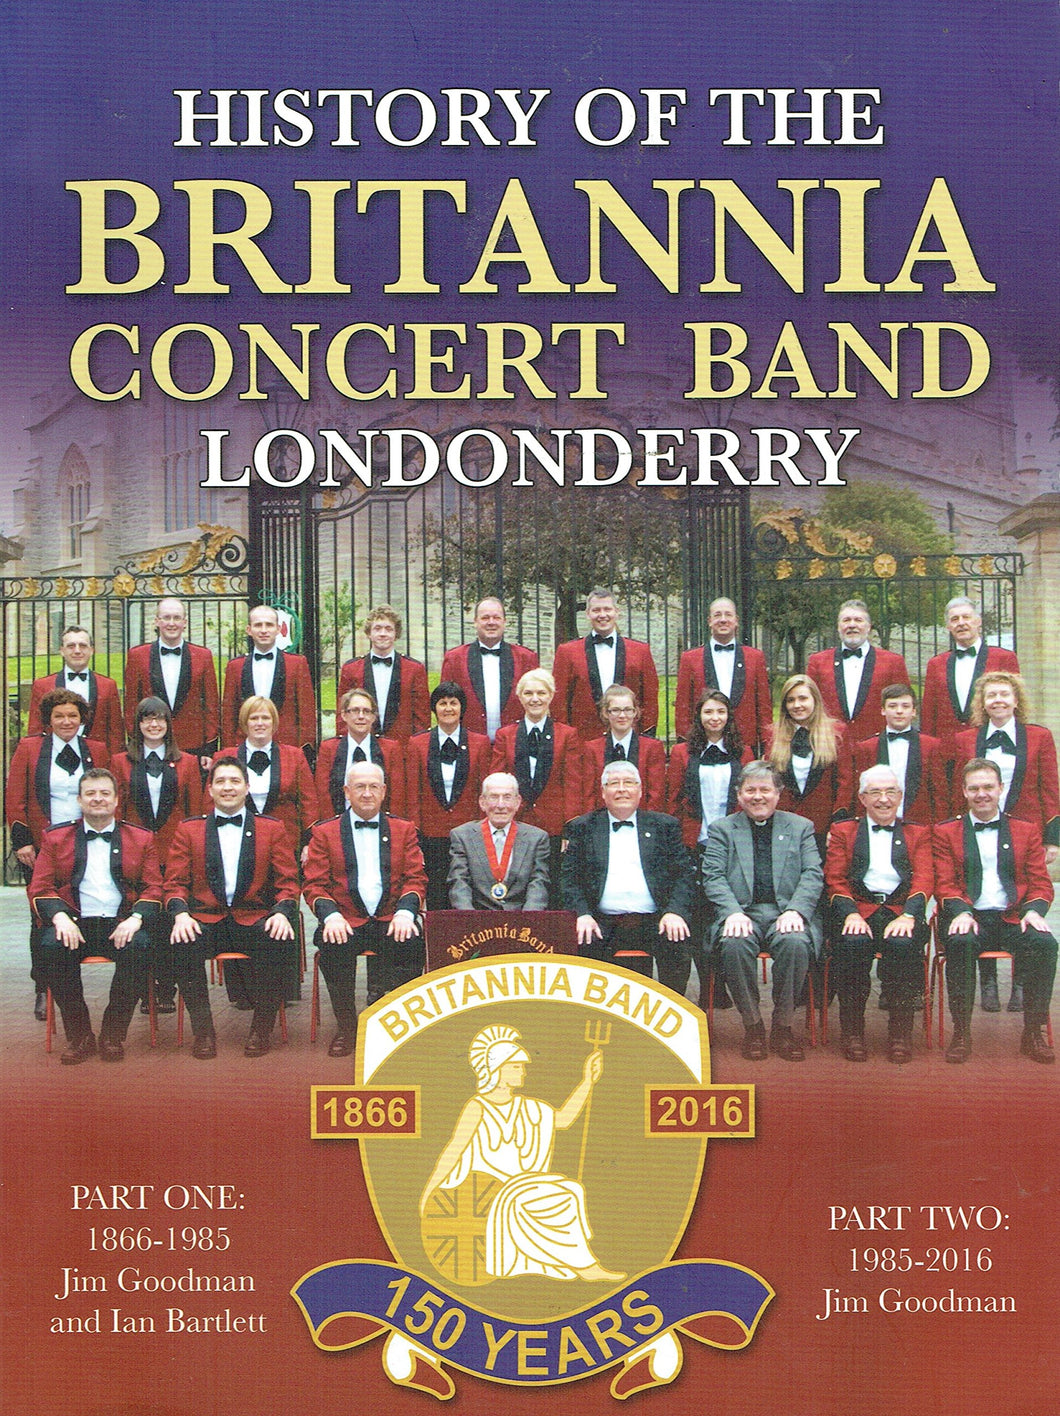 History of the Britannia Concert Band Londonderry